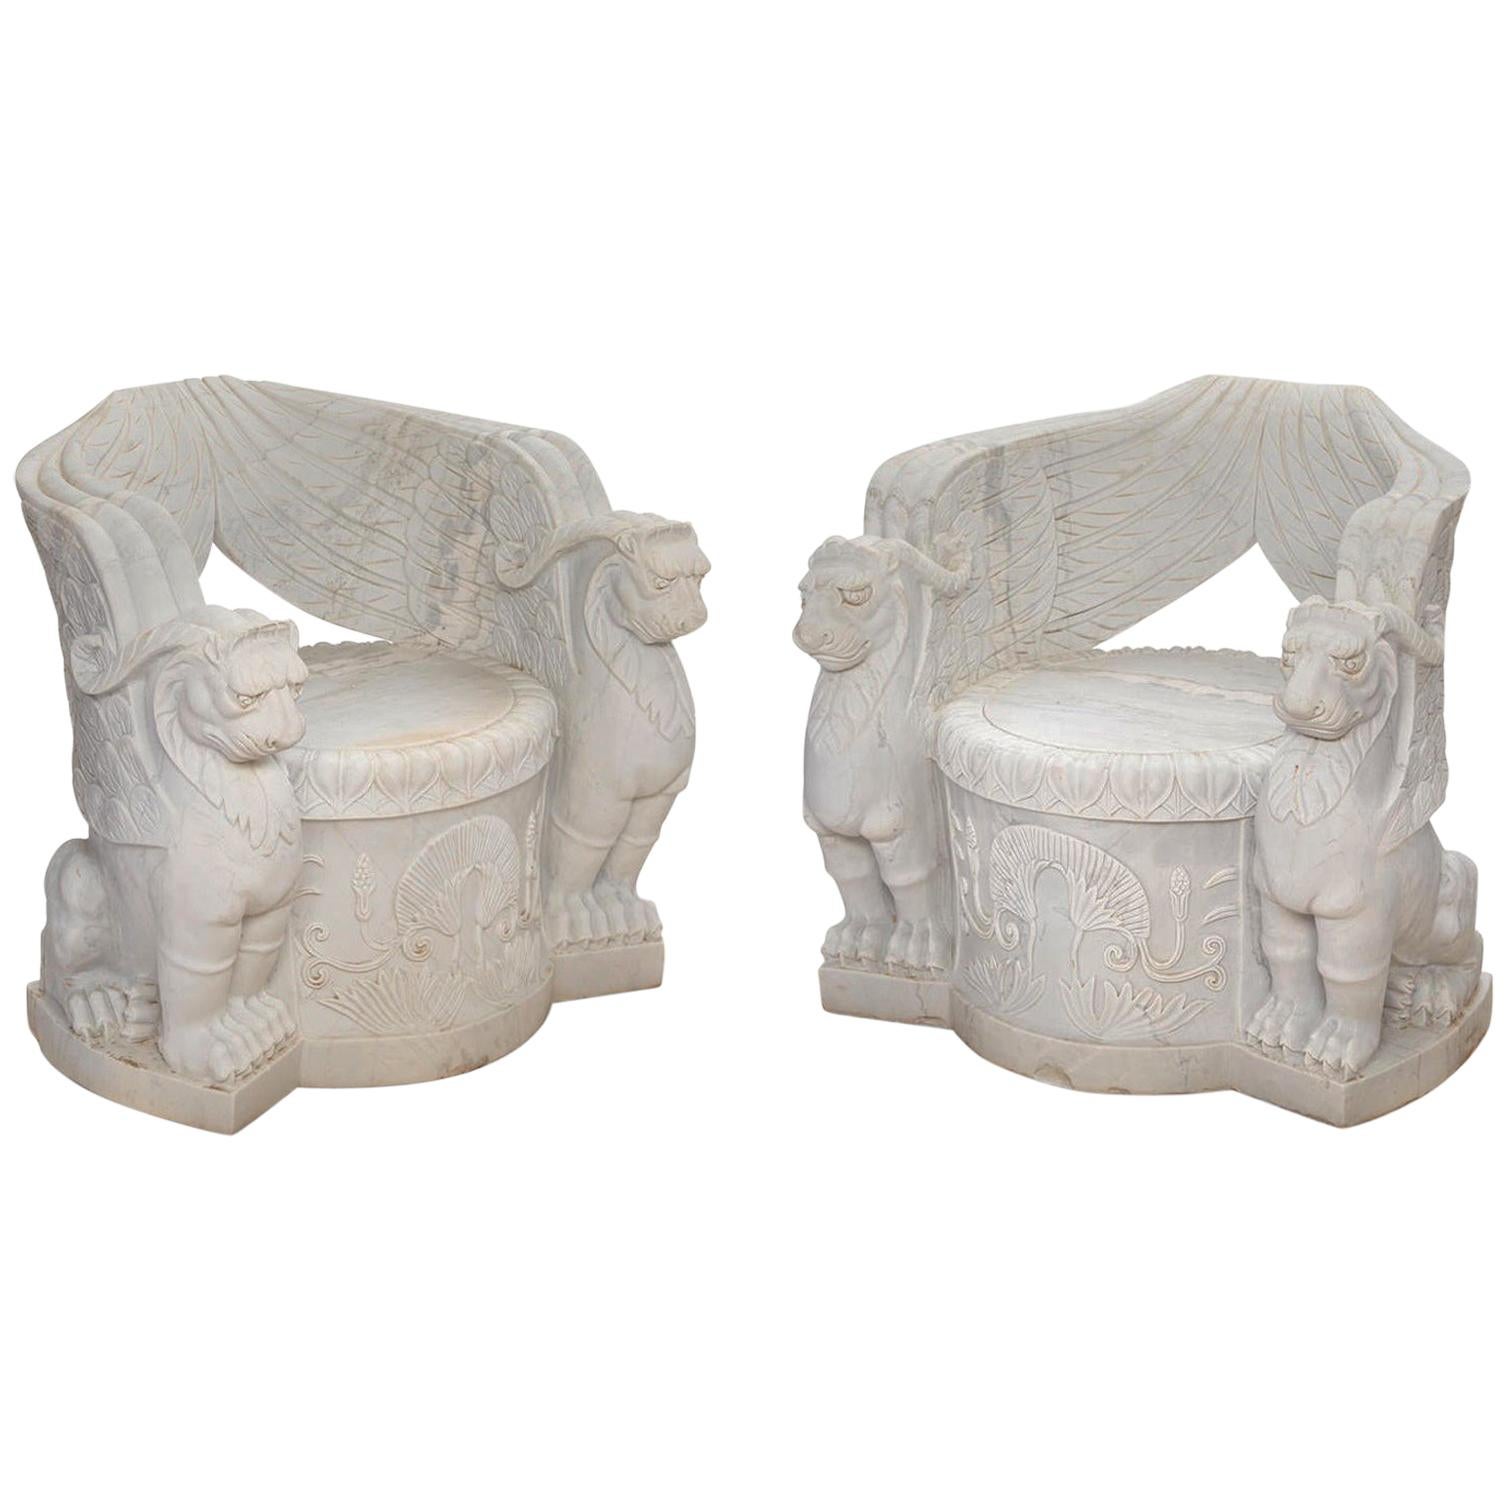 Pair of Empire Style Carved Marble Chairs